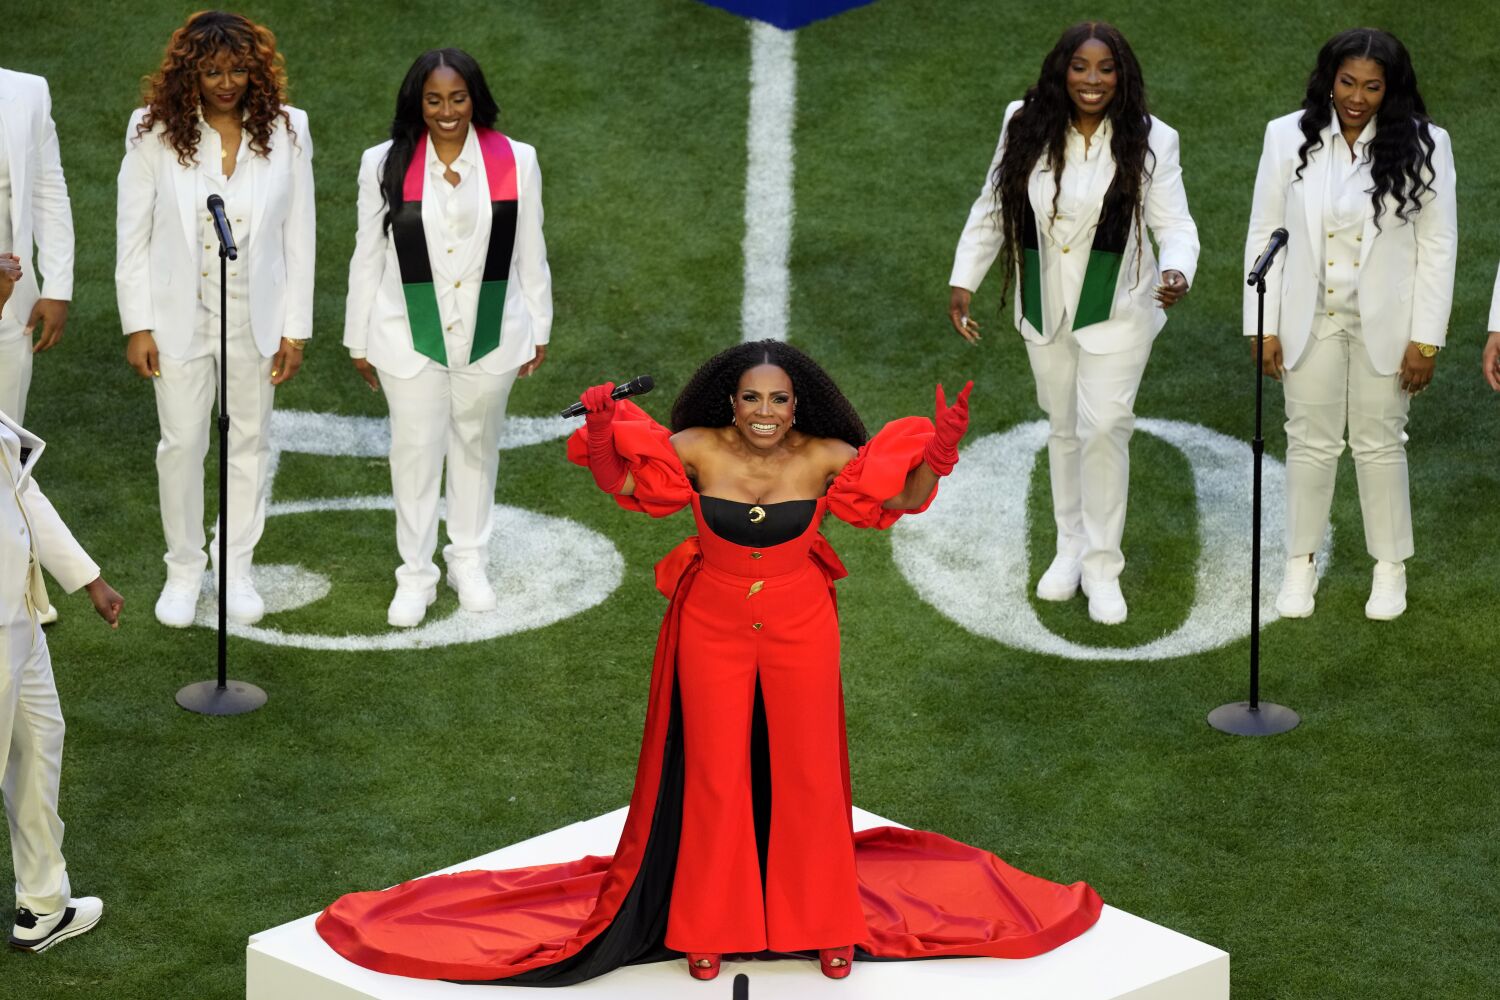 Sheryl Lee Ralph deflects speculation that she lip-synced at the Super Bowl